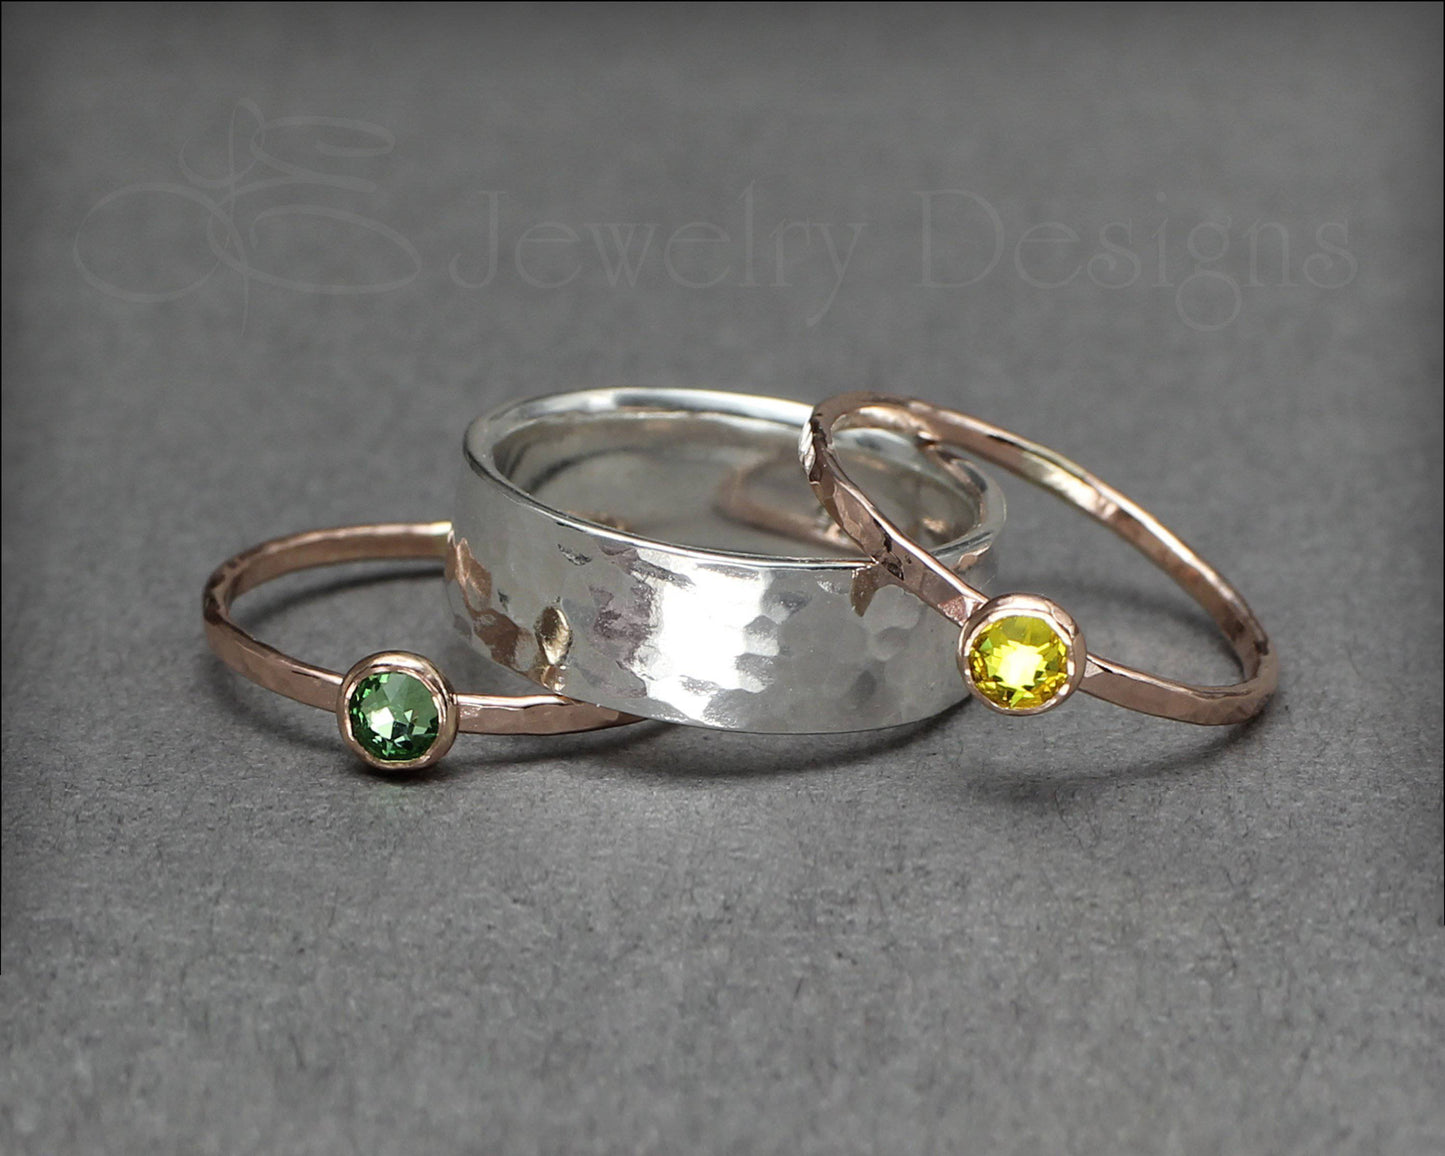 Wide Band Birthstone Ring Set - LE Jewelry Designs